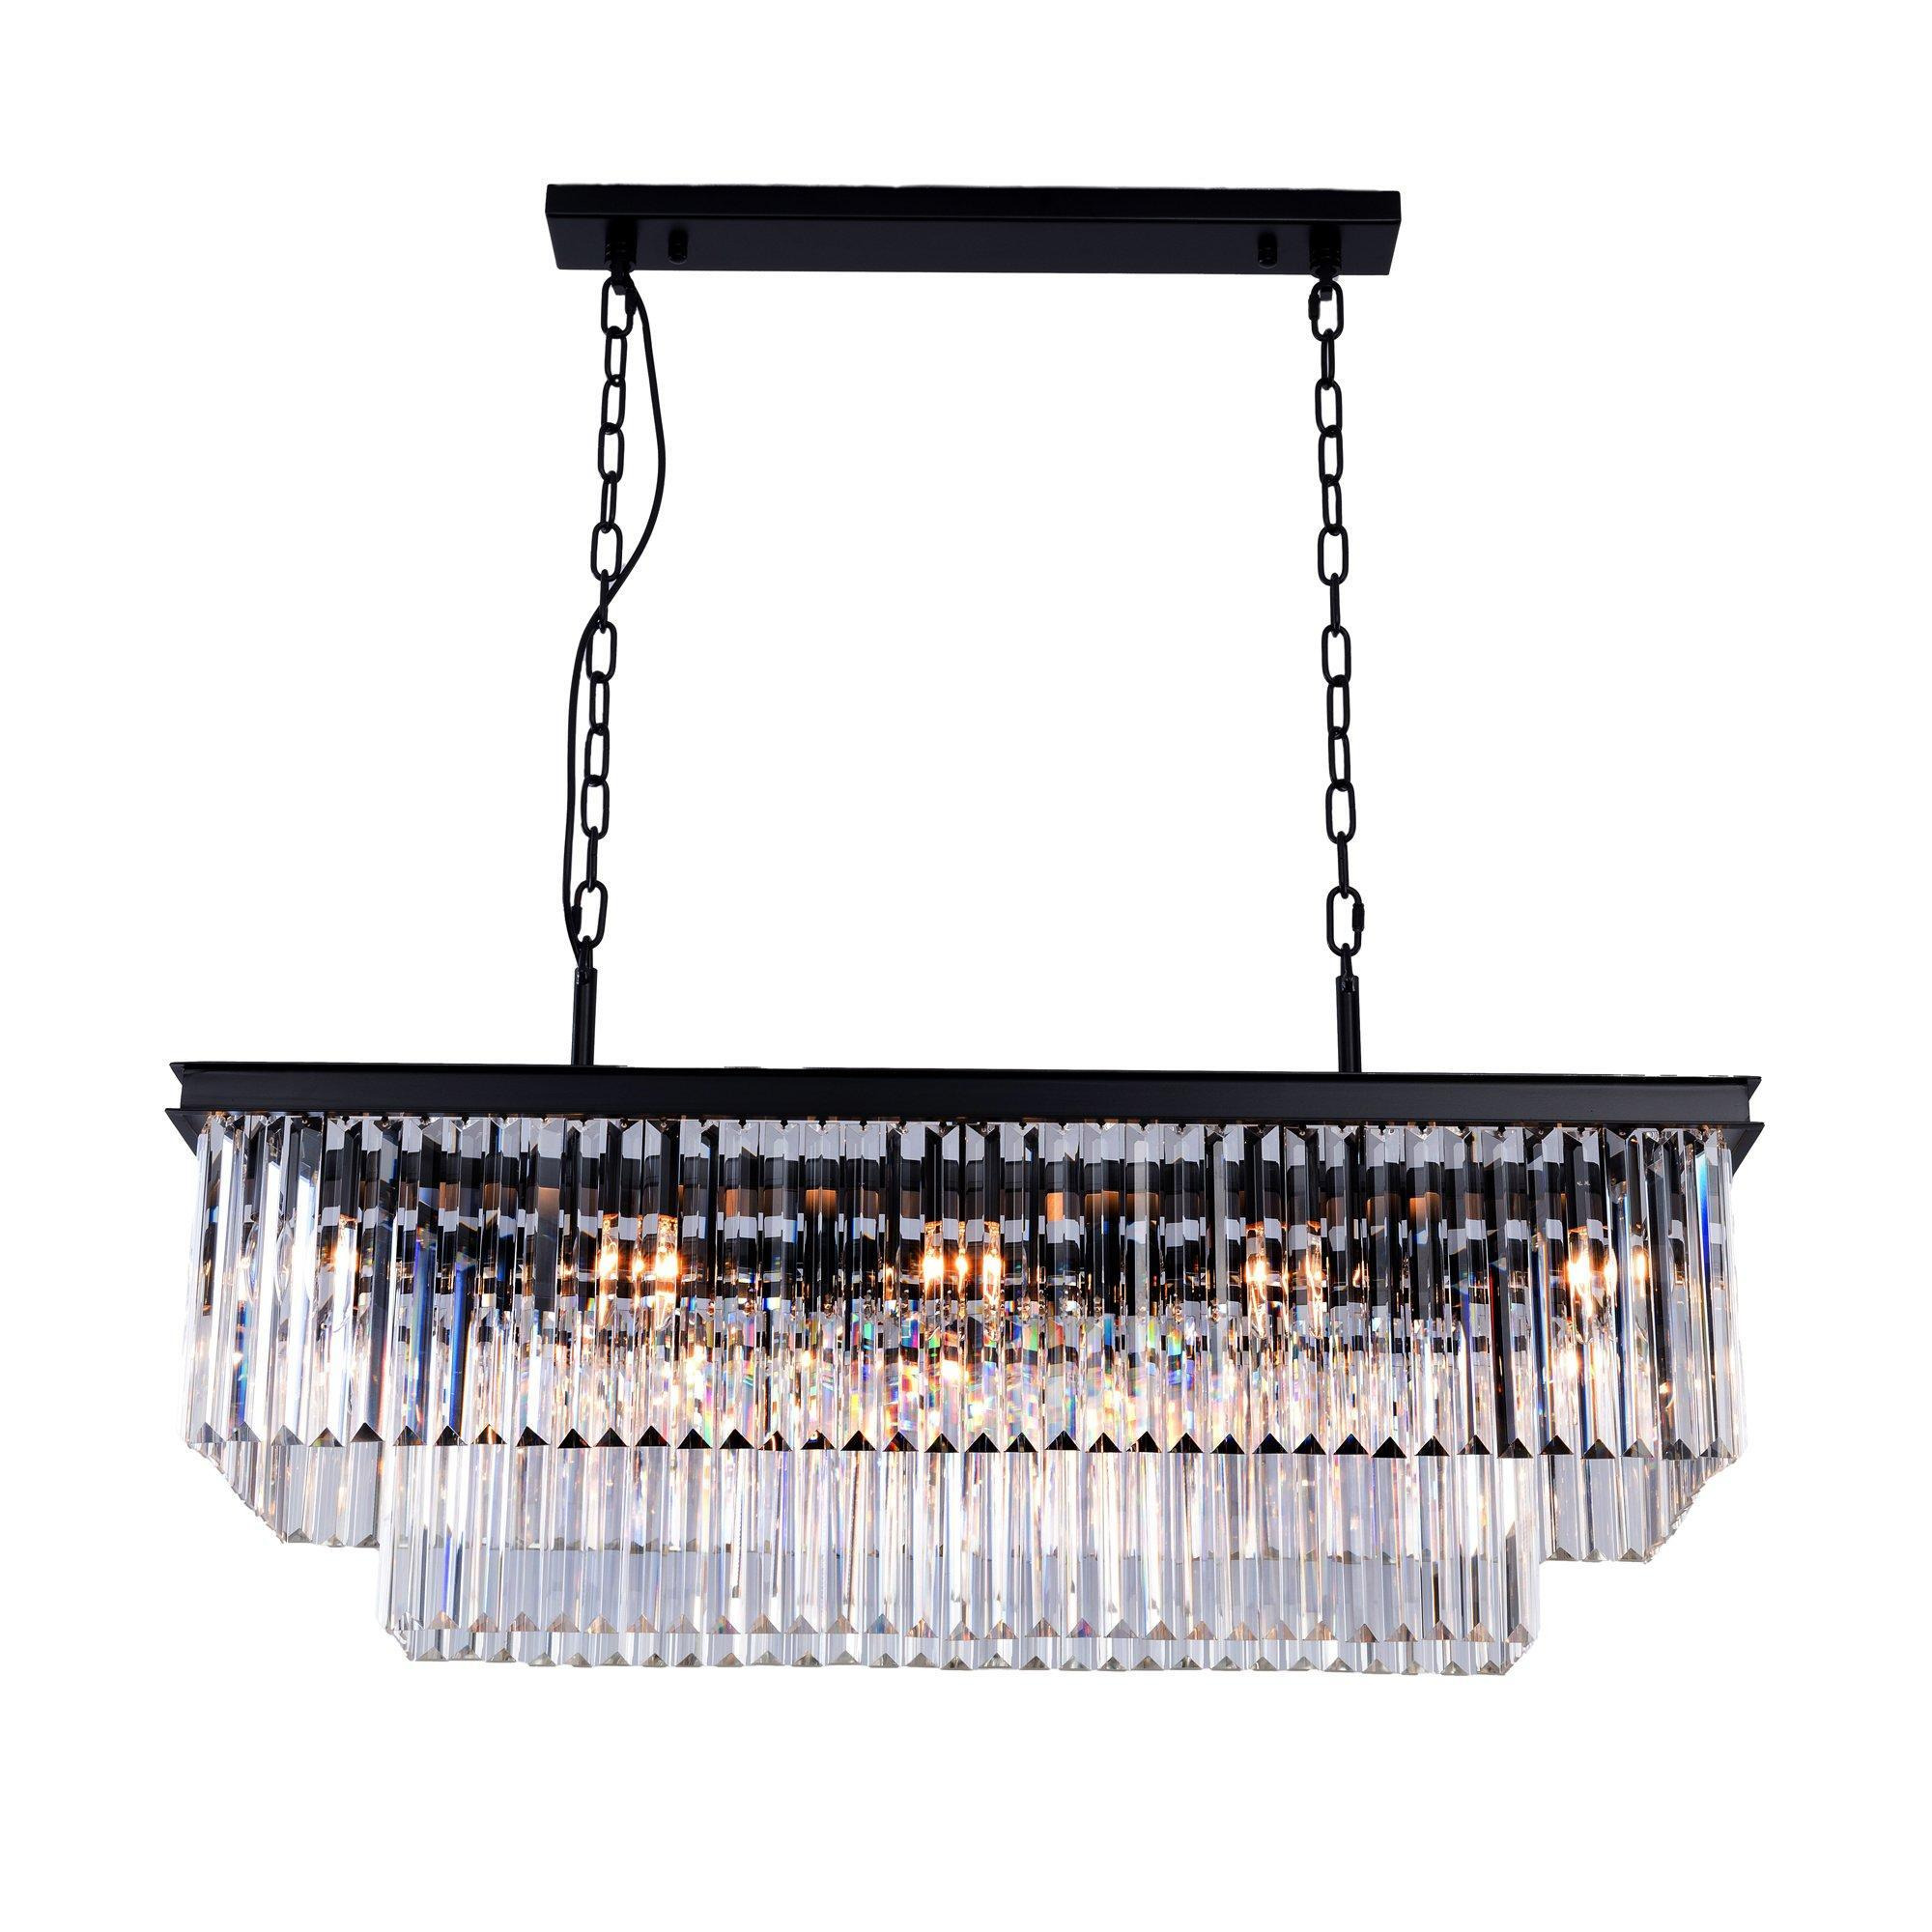 Large 10 Light Pendant Ceiling Light, with Decorative crystals surrounding lights, Kitchen Island Chandelier - image 1